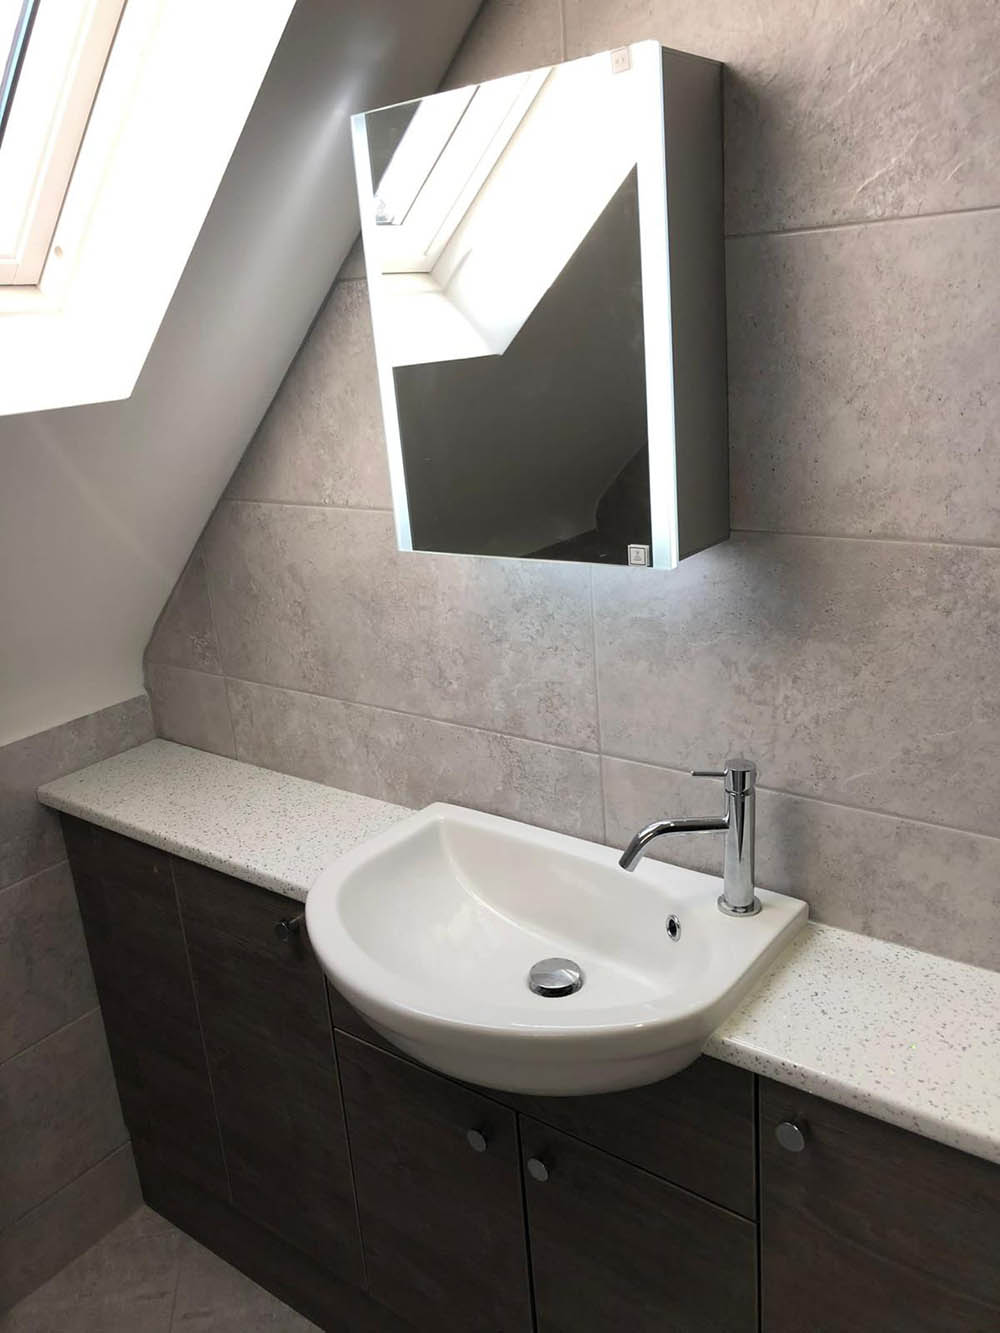 LED mirror with storage over a bathroom sink